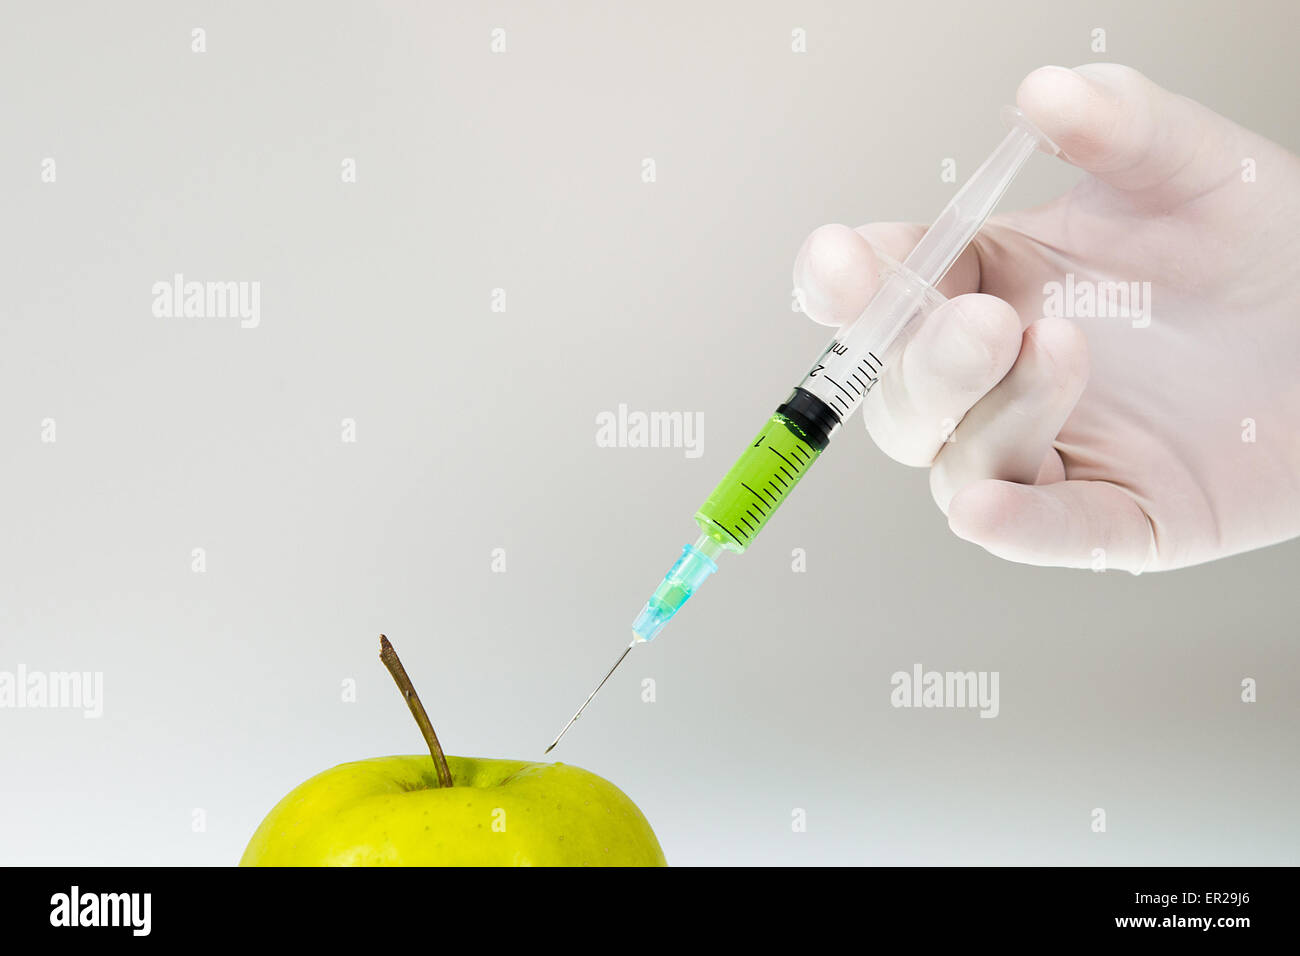 Hand is injecting chemicals into an apple. White and grey gradient background. High res photo taken with a full frame Nikon D610 Stock Photo